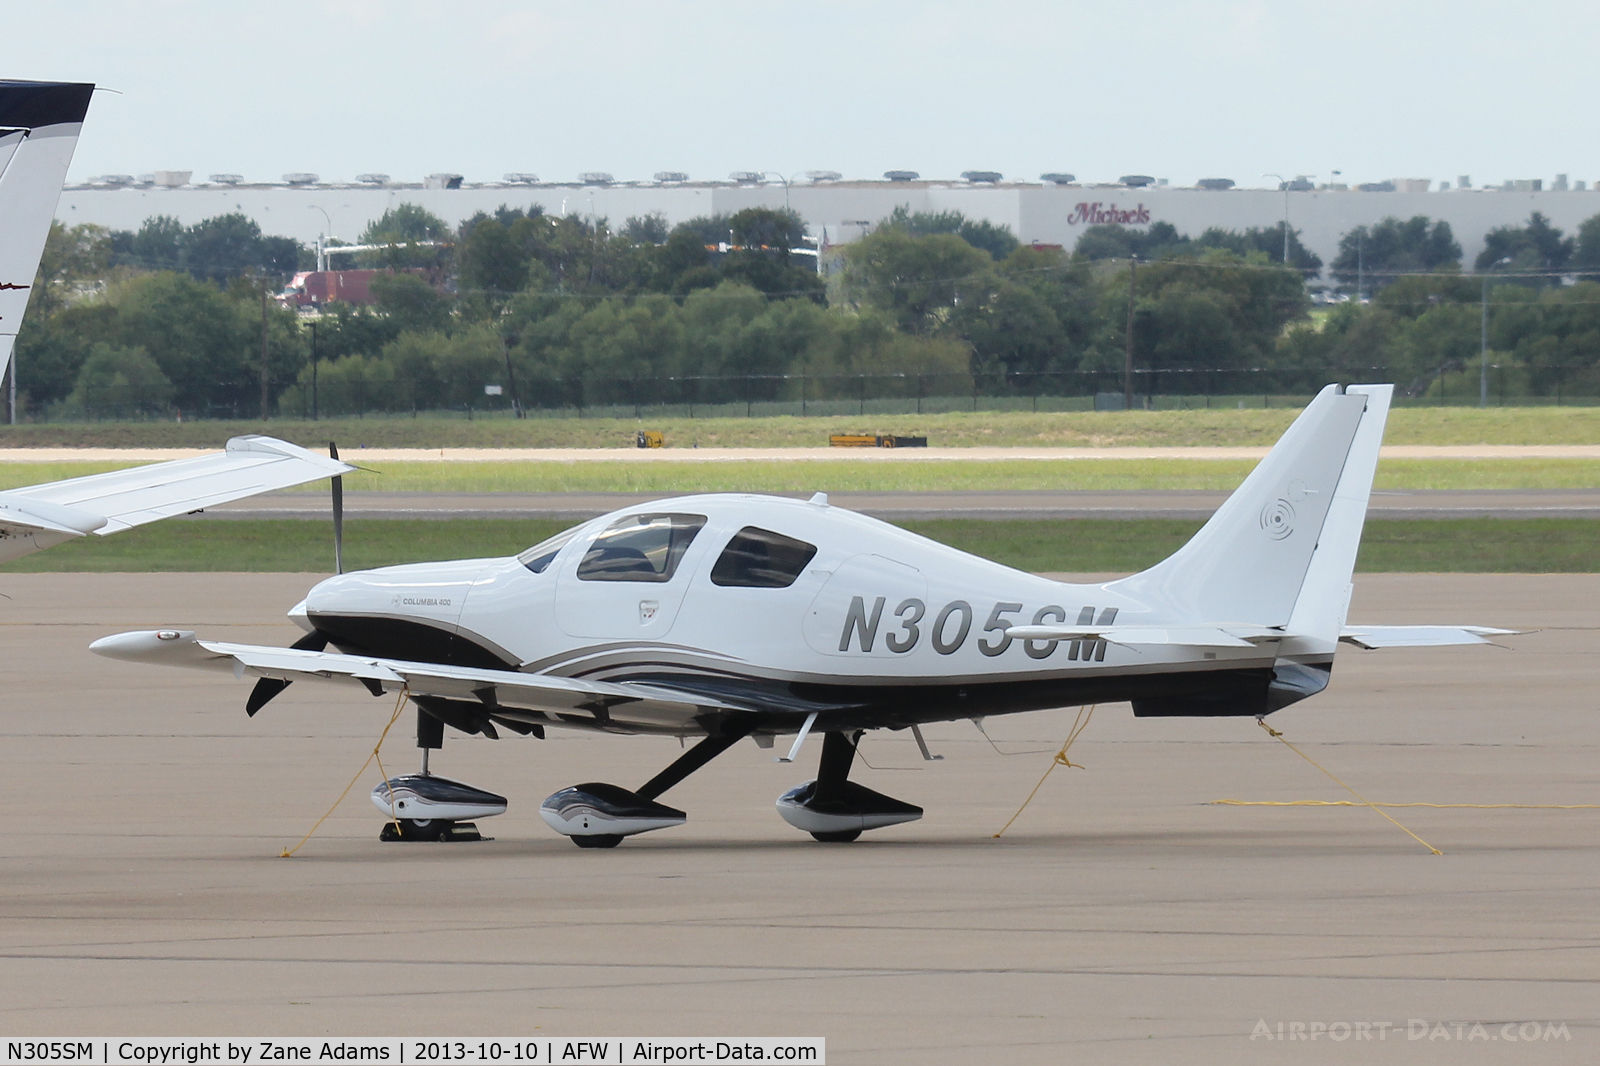 N305SM, 2006 Columbia Aircraft Mfg LC41-550FG C/N 41688, At Alliance Airport - Fort Wort, TX